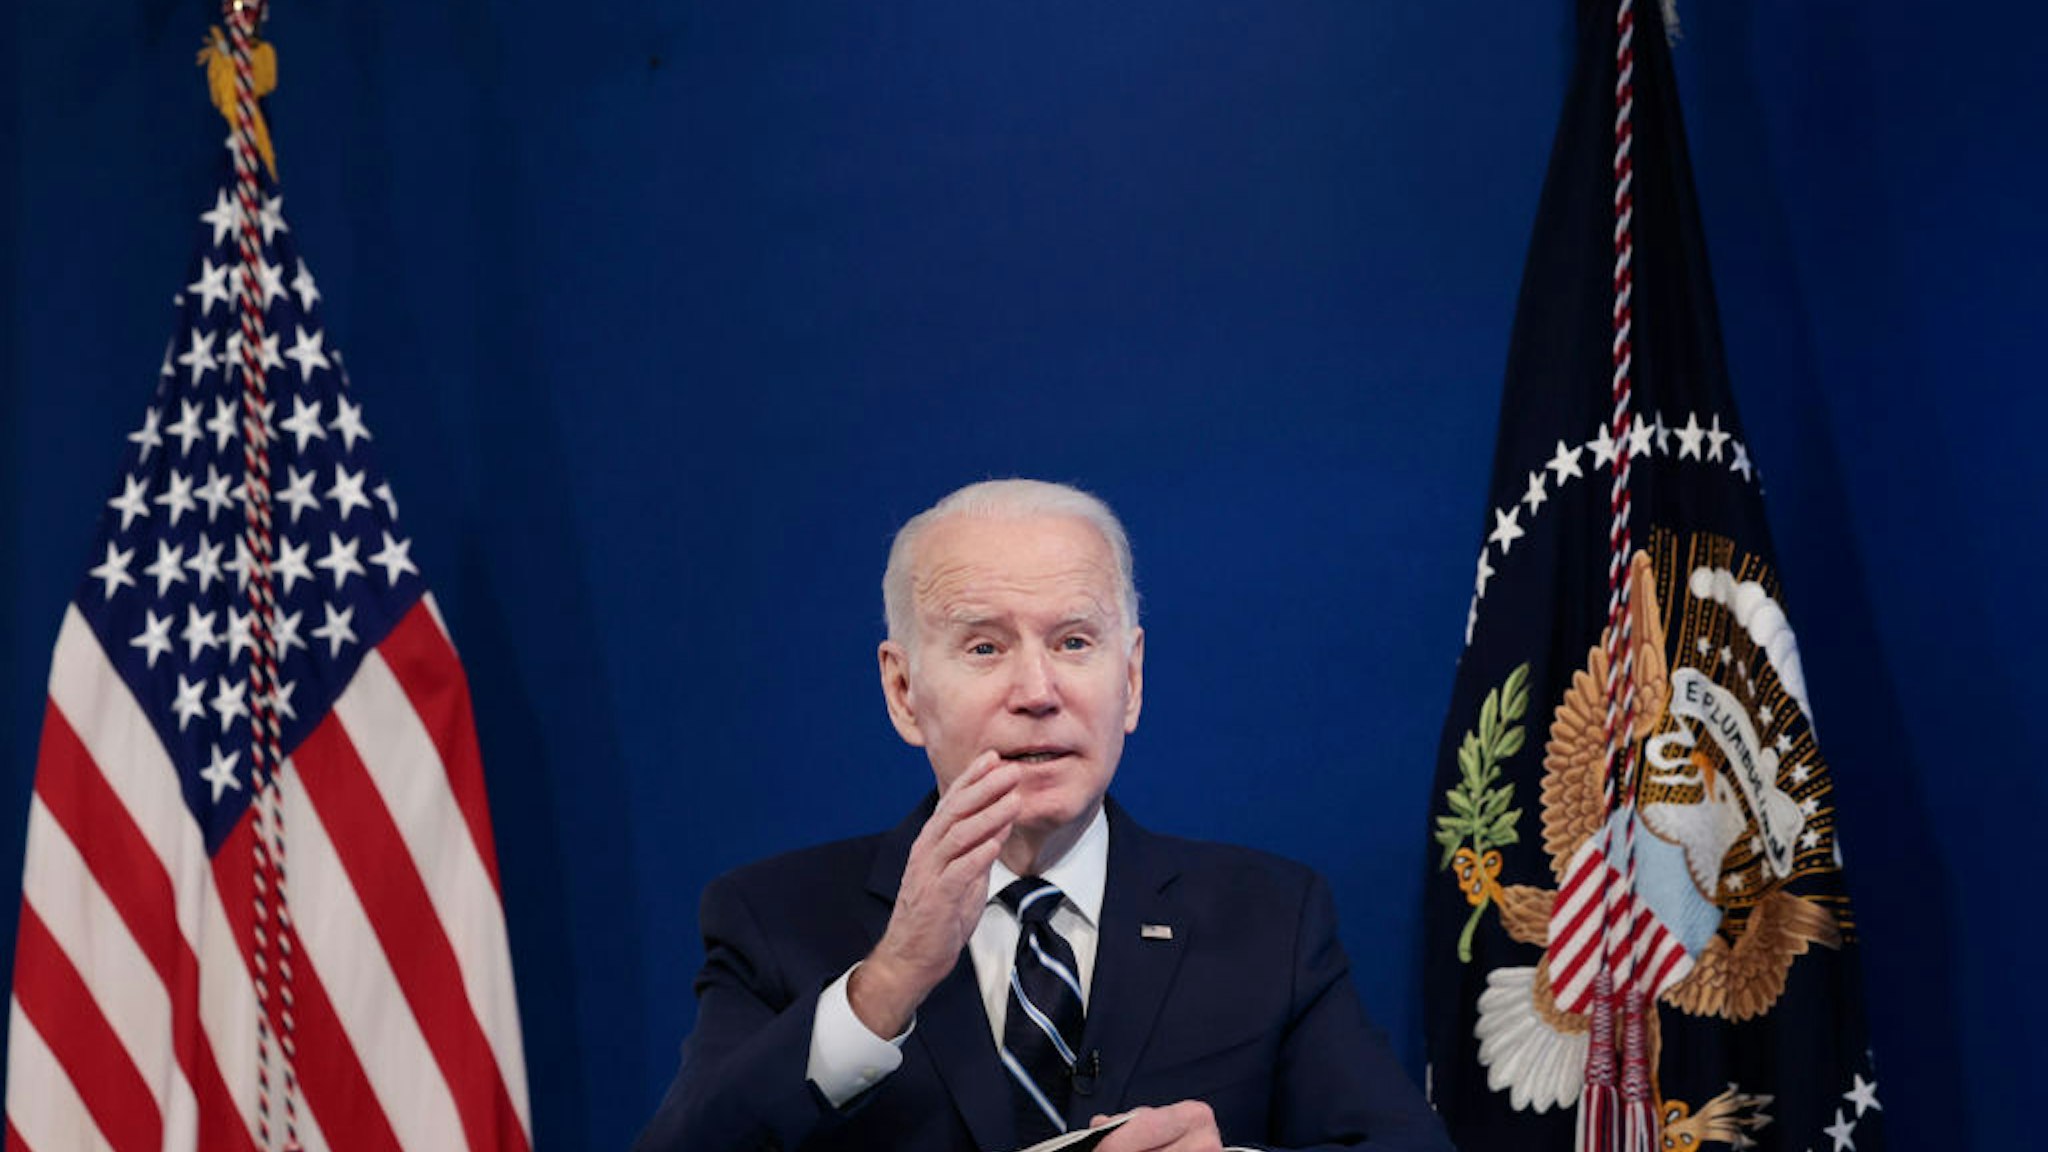 WASHINGTON, DC - JANUARY 13: U.S. President Joe Biden gestures as he gives remarks on his administration's response to the surge in COVID-19 cases across the country from the South Court Auditorium in the Eisenhower Executive Office Building on January 13, 2022 in Washington, DC. During the remarks President Biden urged unvaccinated individuals to seek the vaccine and highlighted his plan to distribute free COVID-19 tests and masks to the American people.